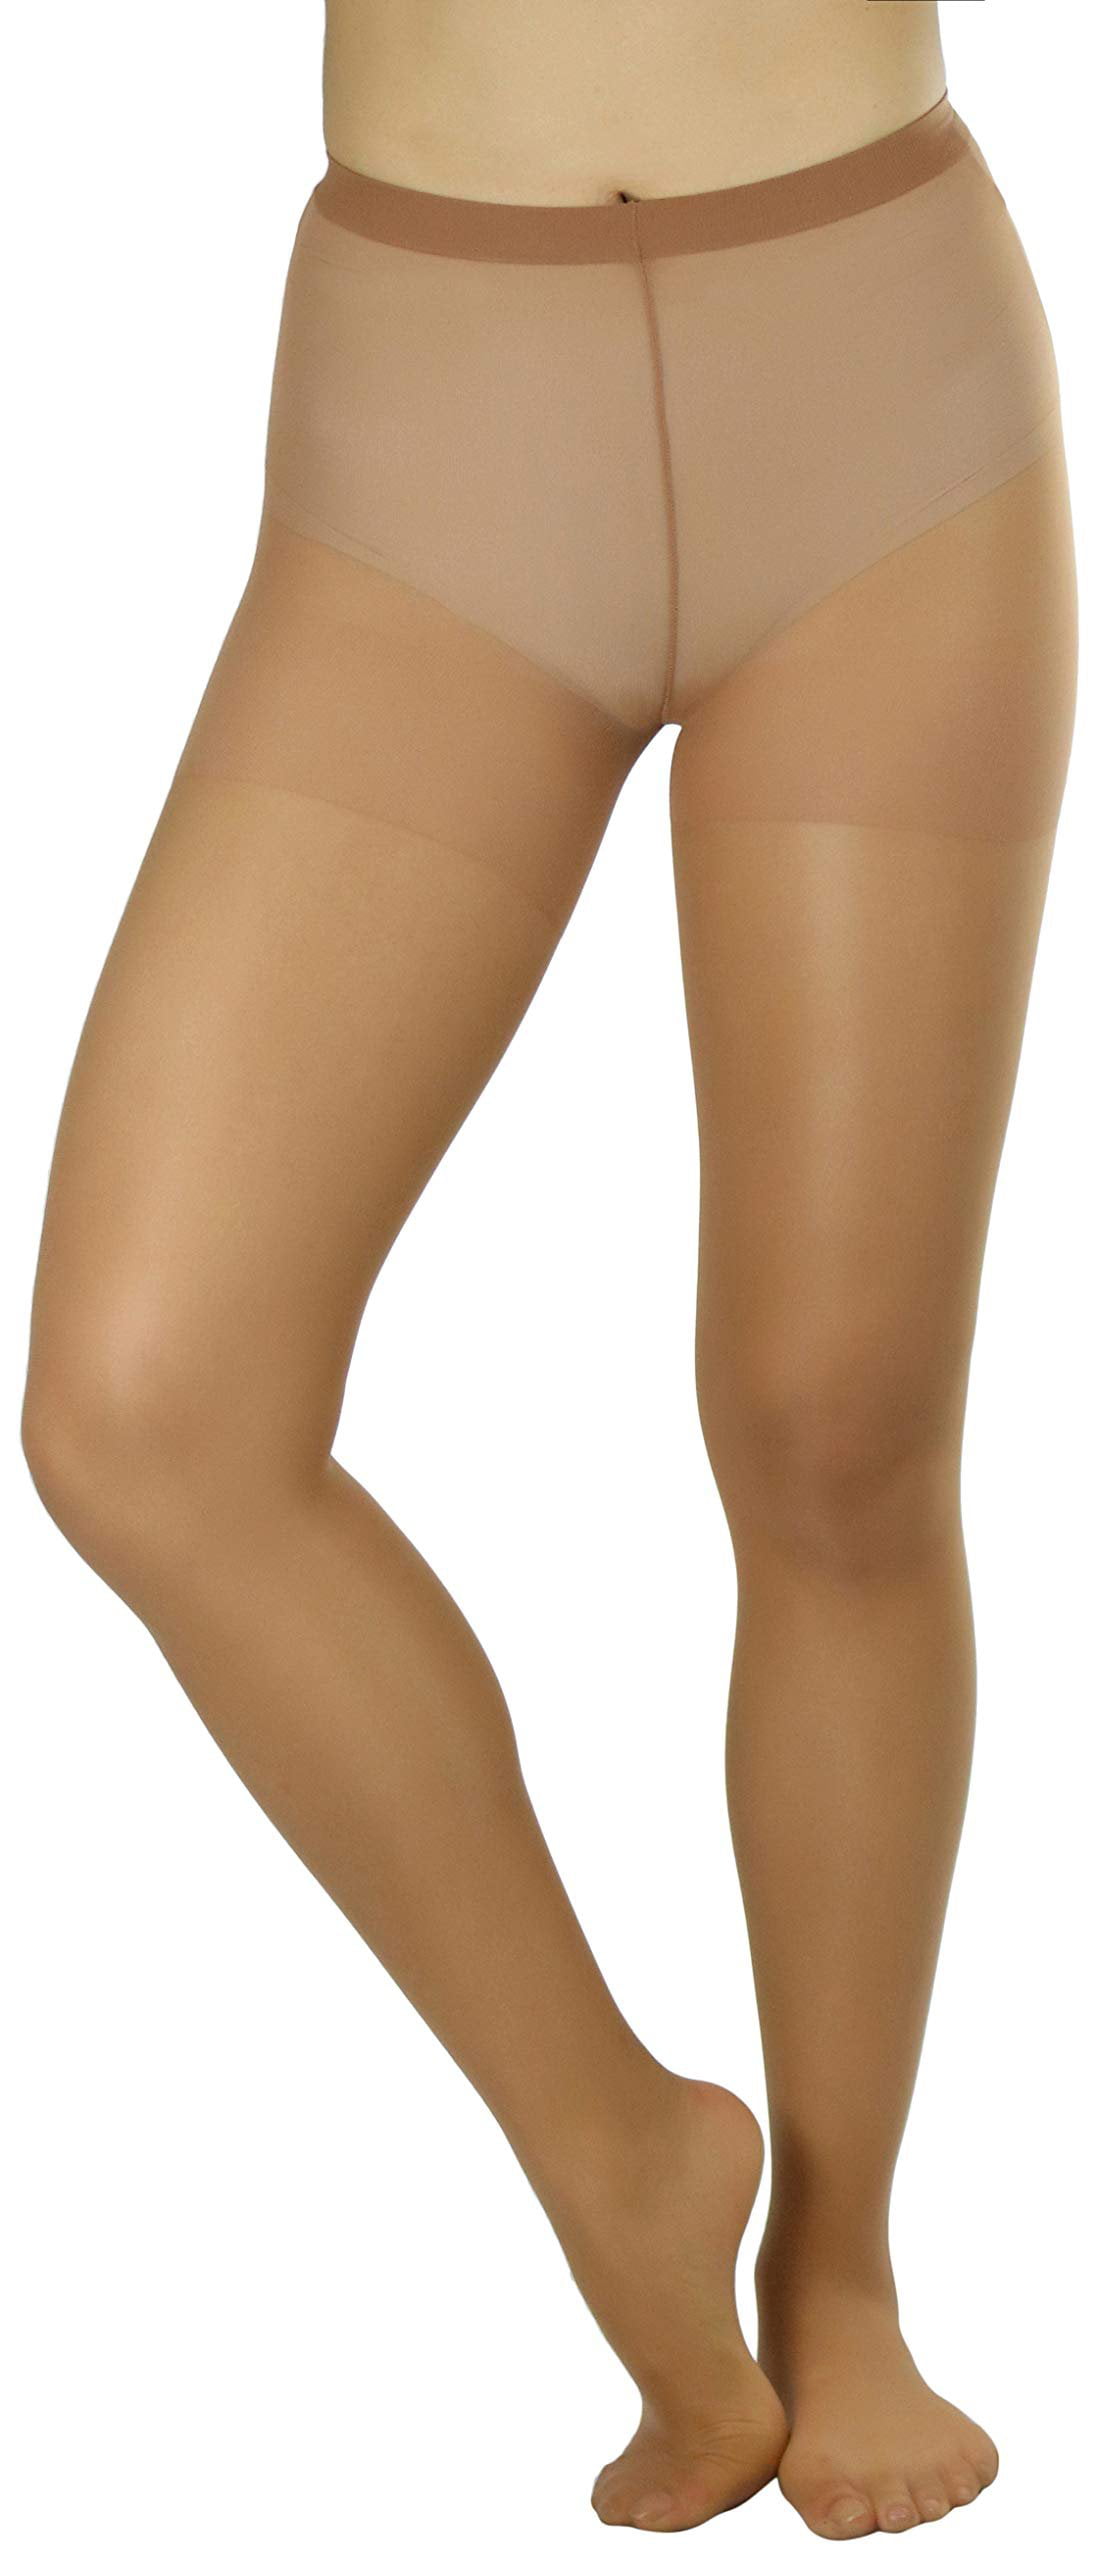 ToBeInStyle Women's Control Top Sheer Full Footed Panty Hose Hosiery  Stockings - NUDE 14 - One Size Regular 